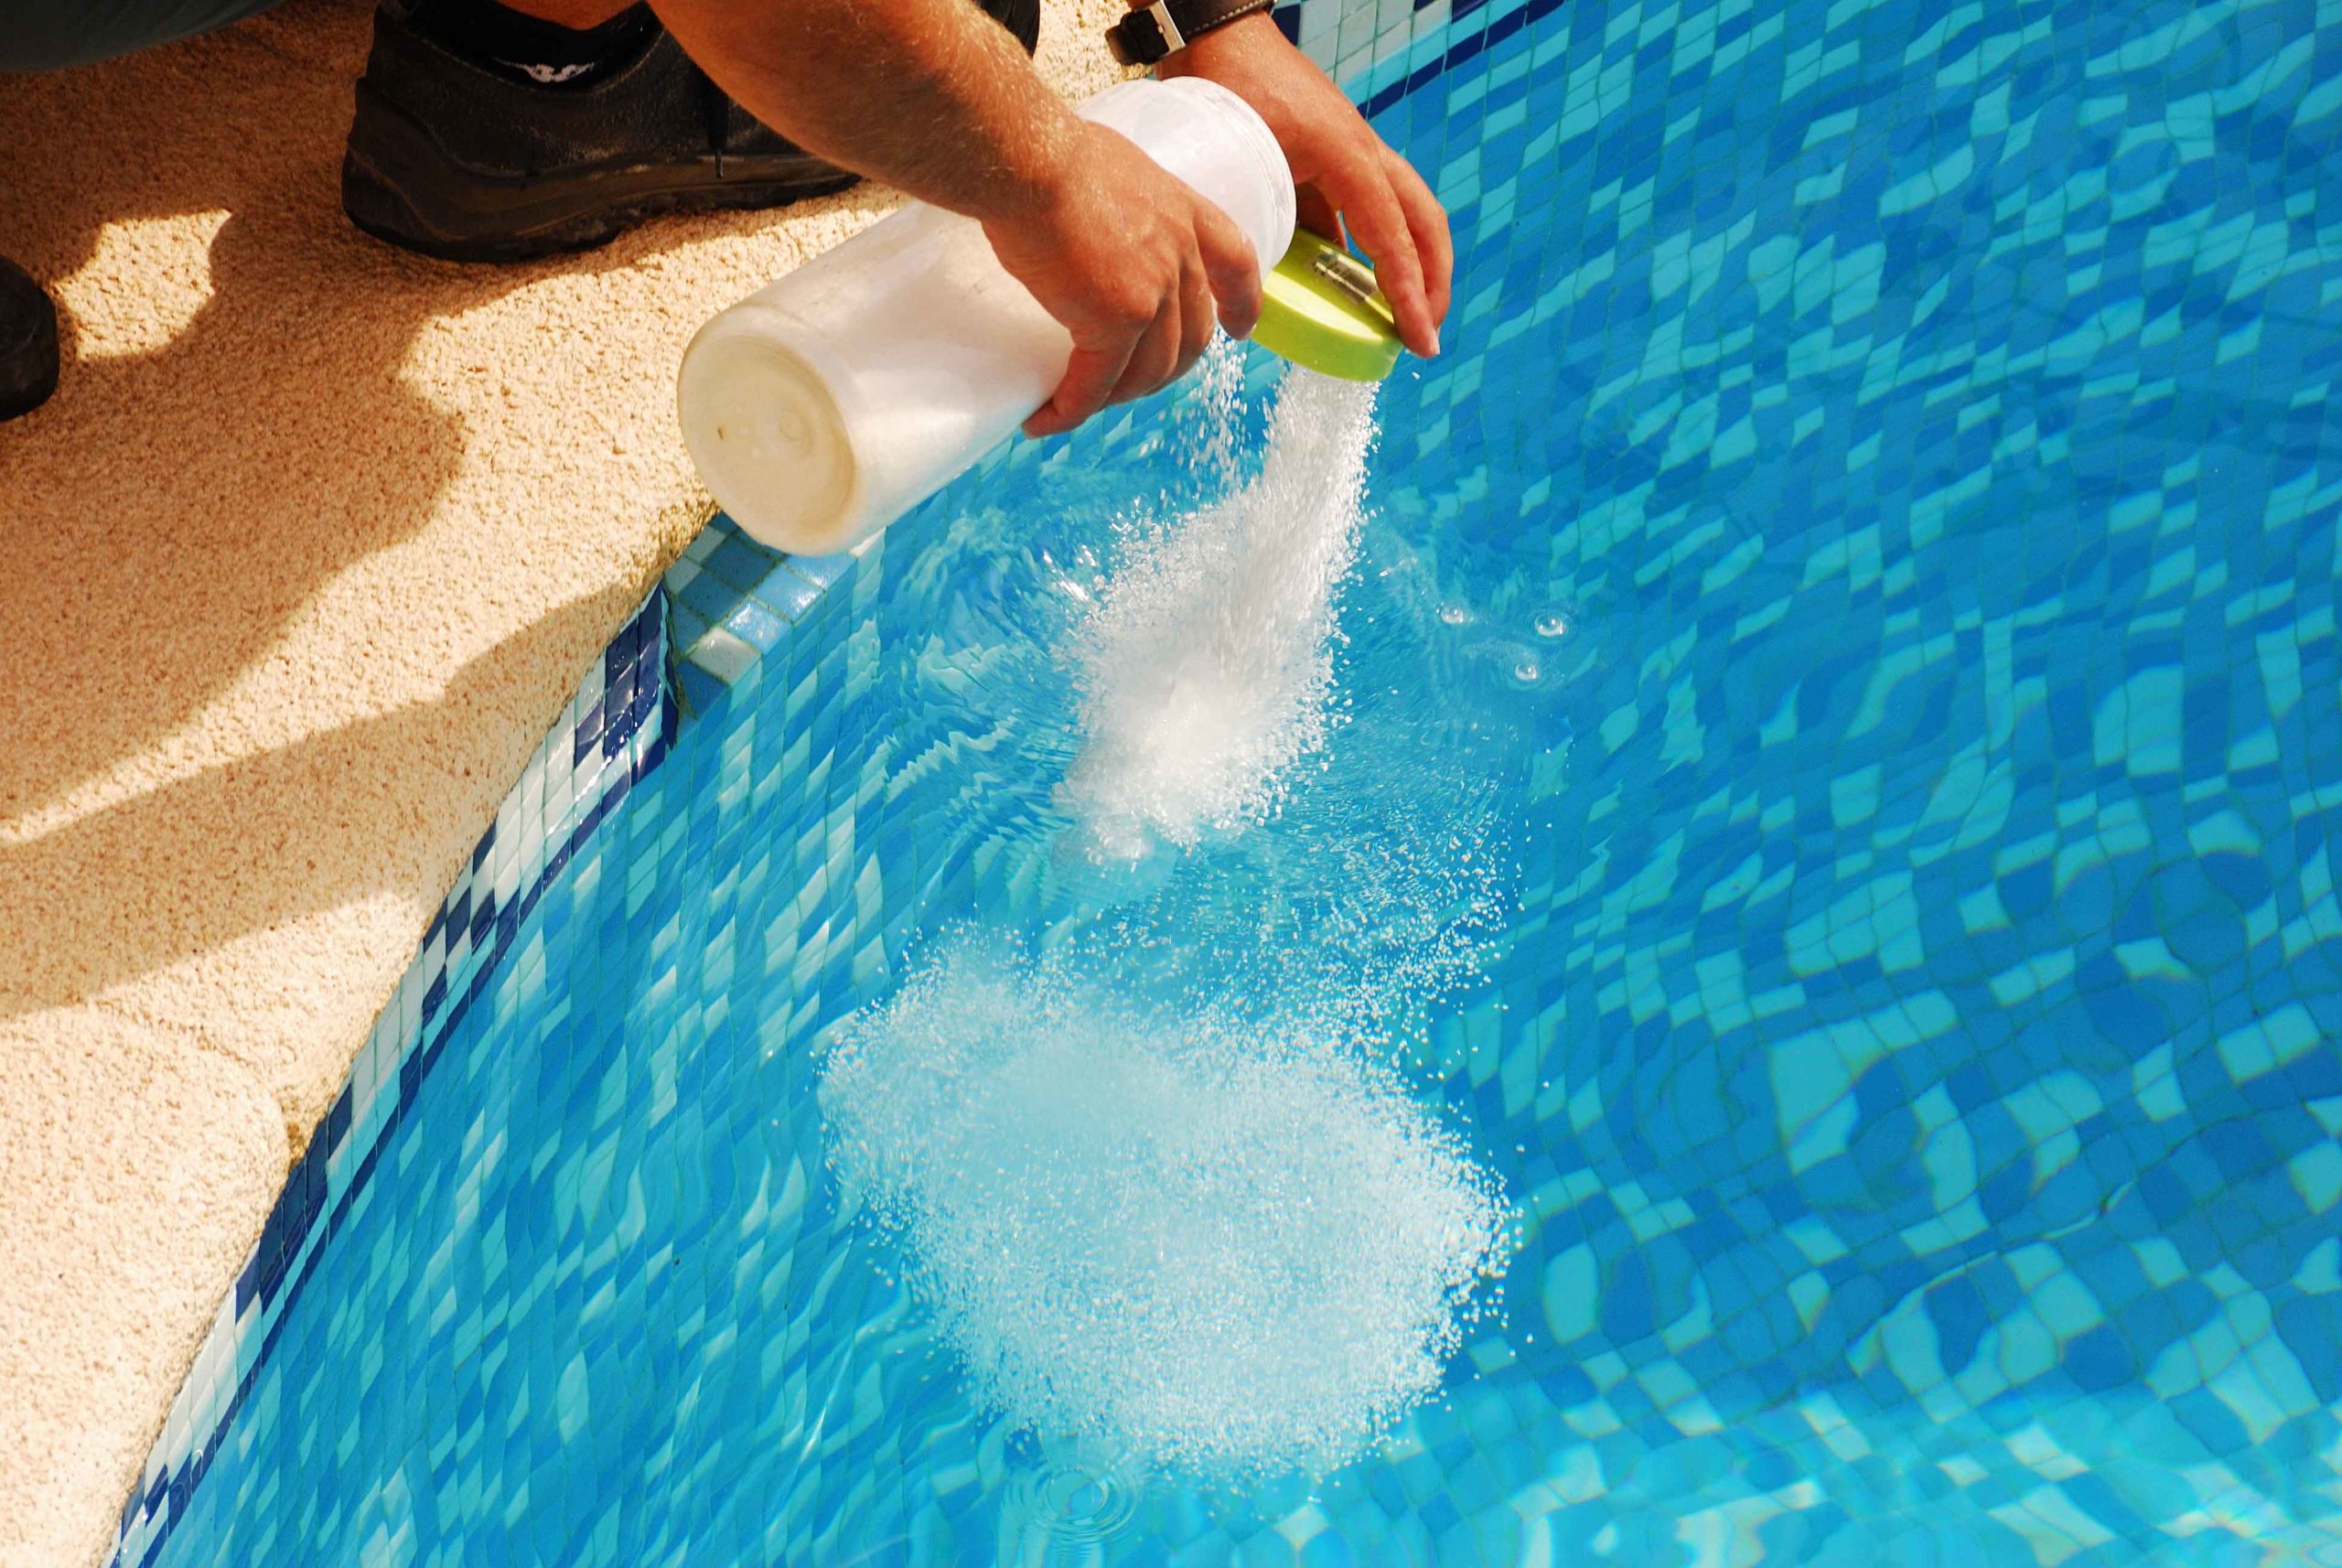 3 Things to Be Aware While Interacting with Pool Chemicals